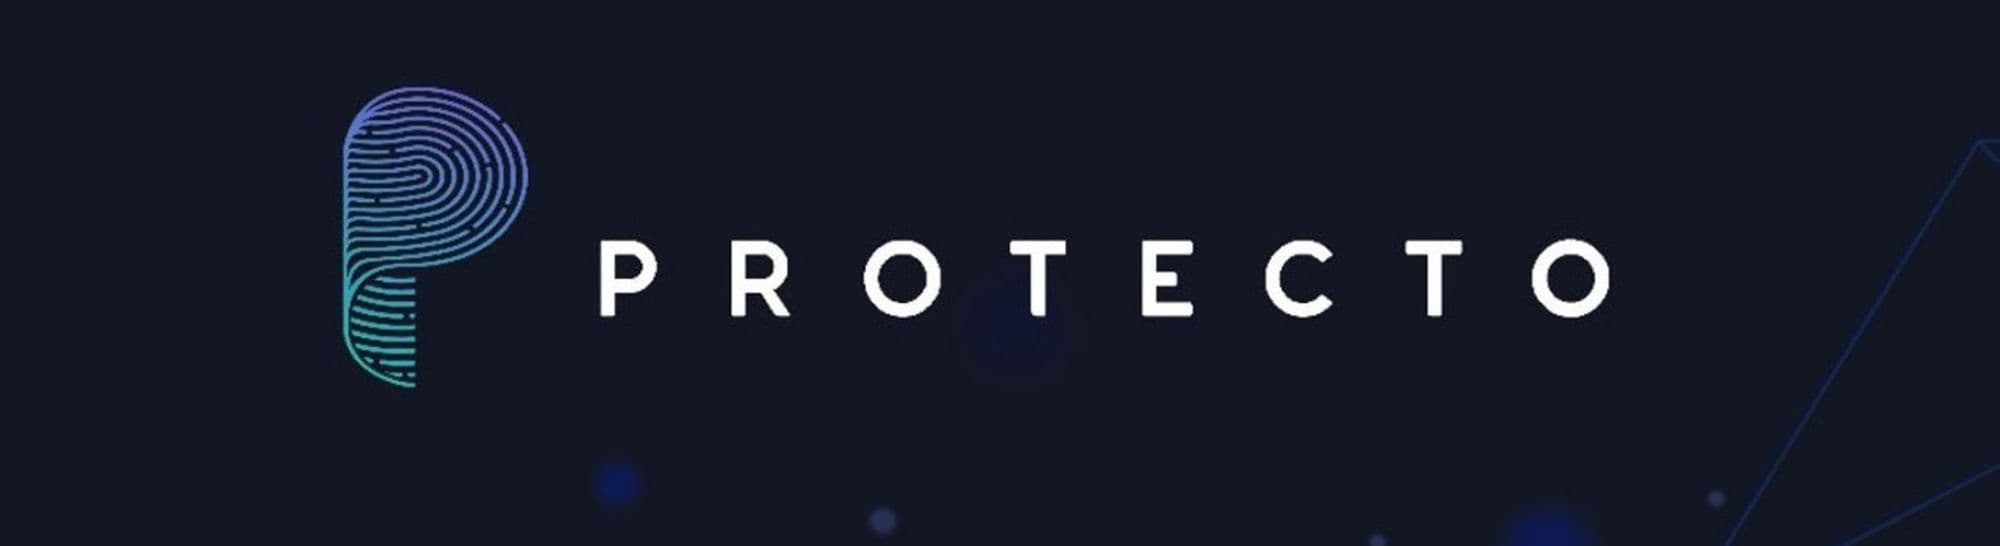 Protecto Cover Image